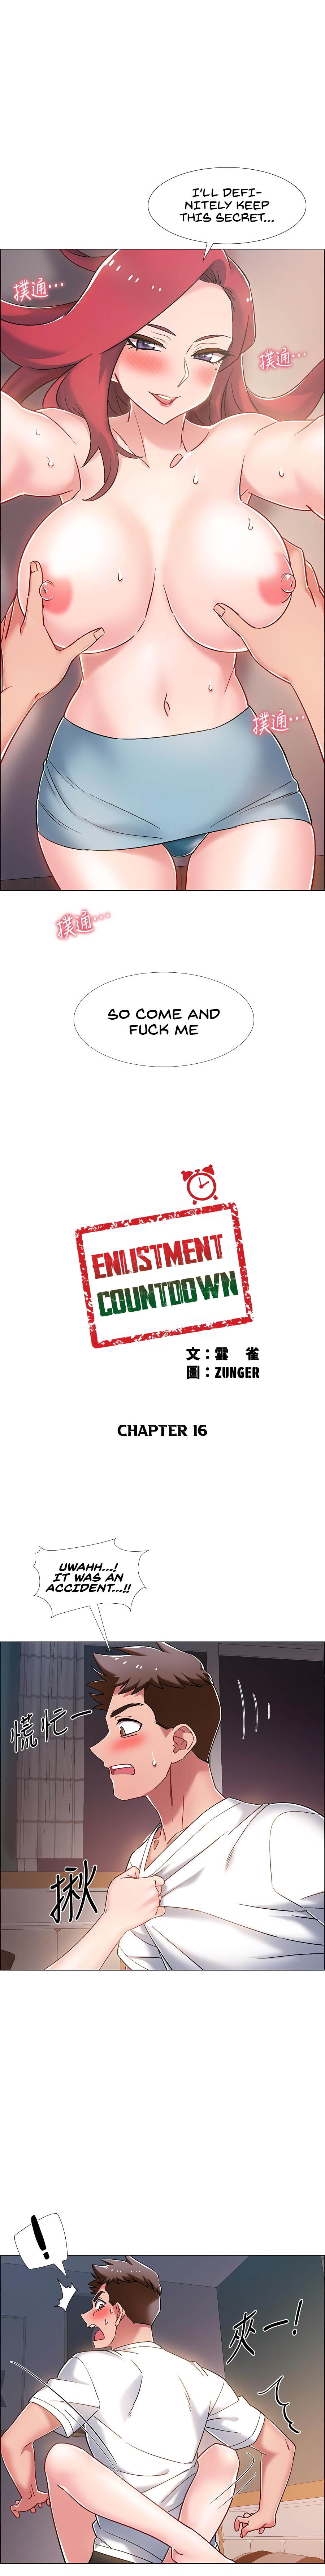 Enlistment Countdown - Page 2